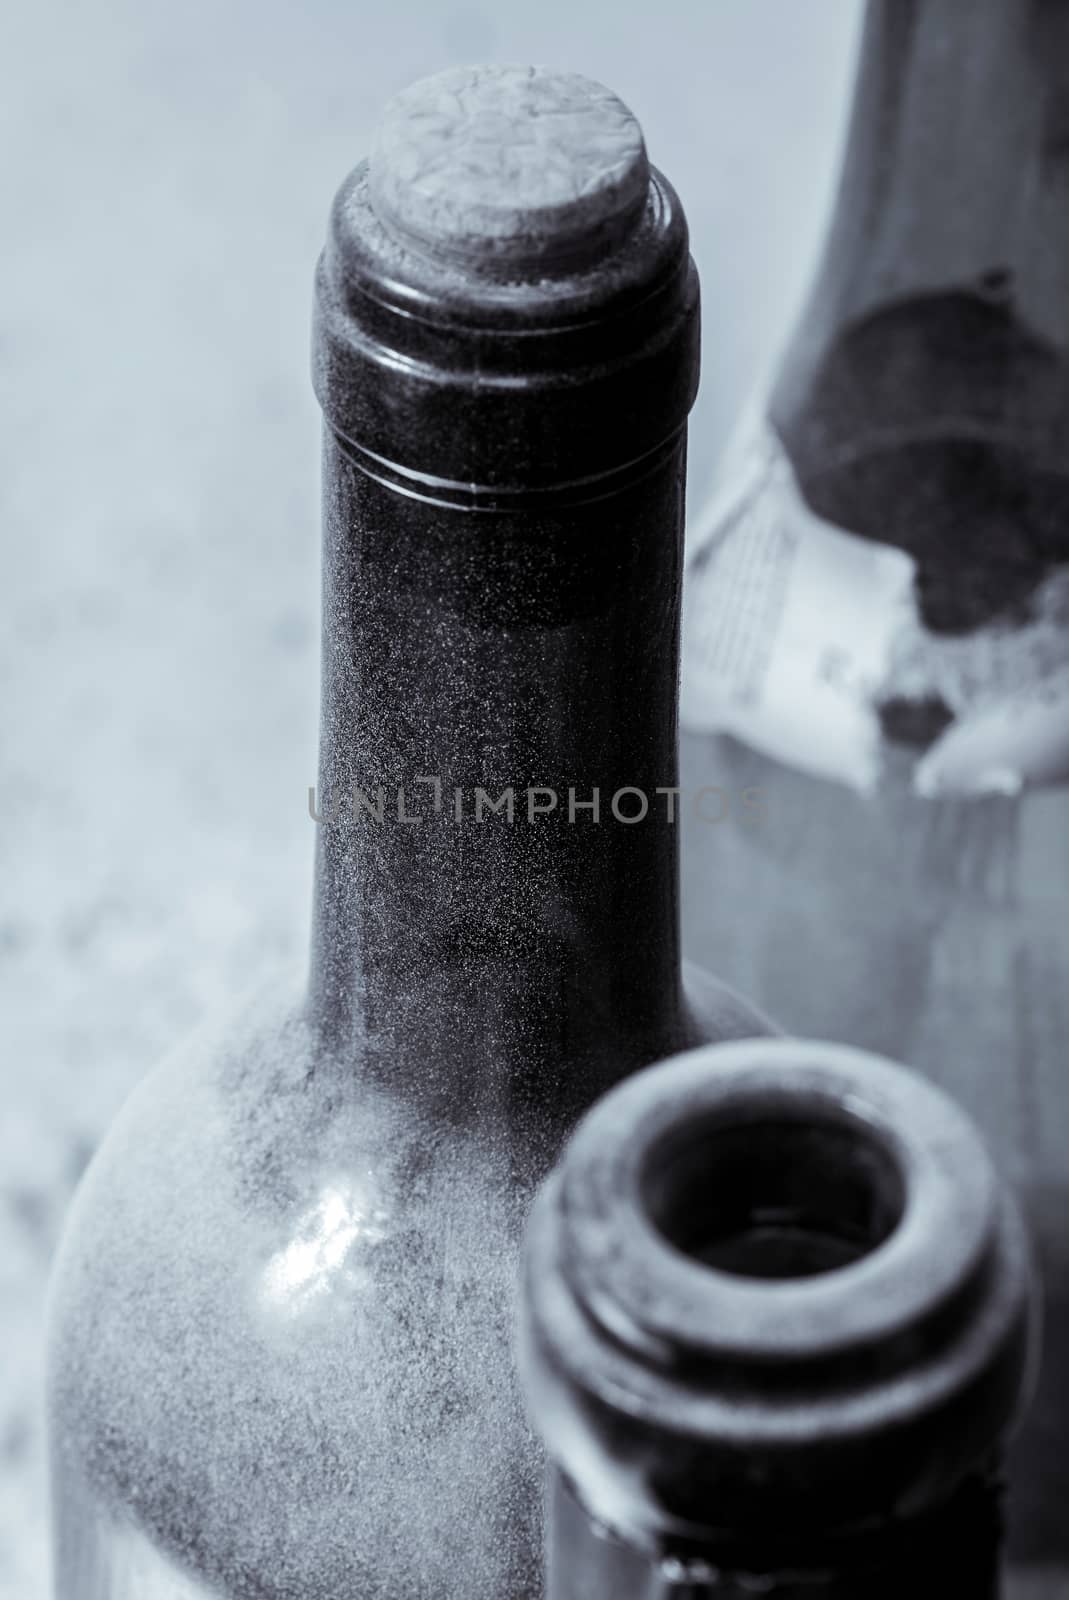 Some very old wine bottles - in  Black and White shot.